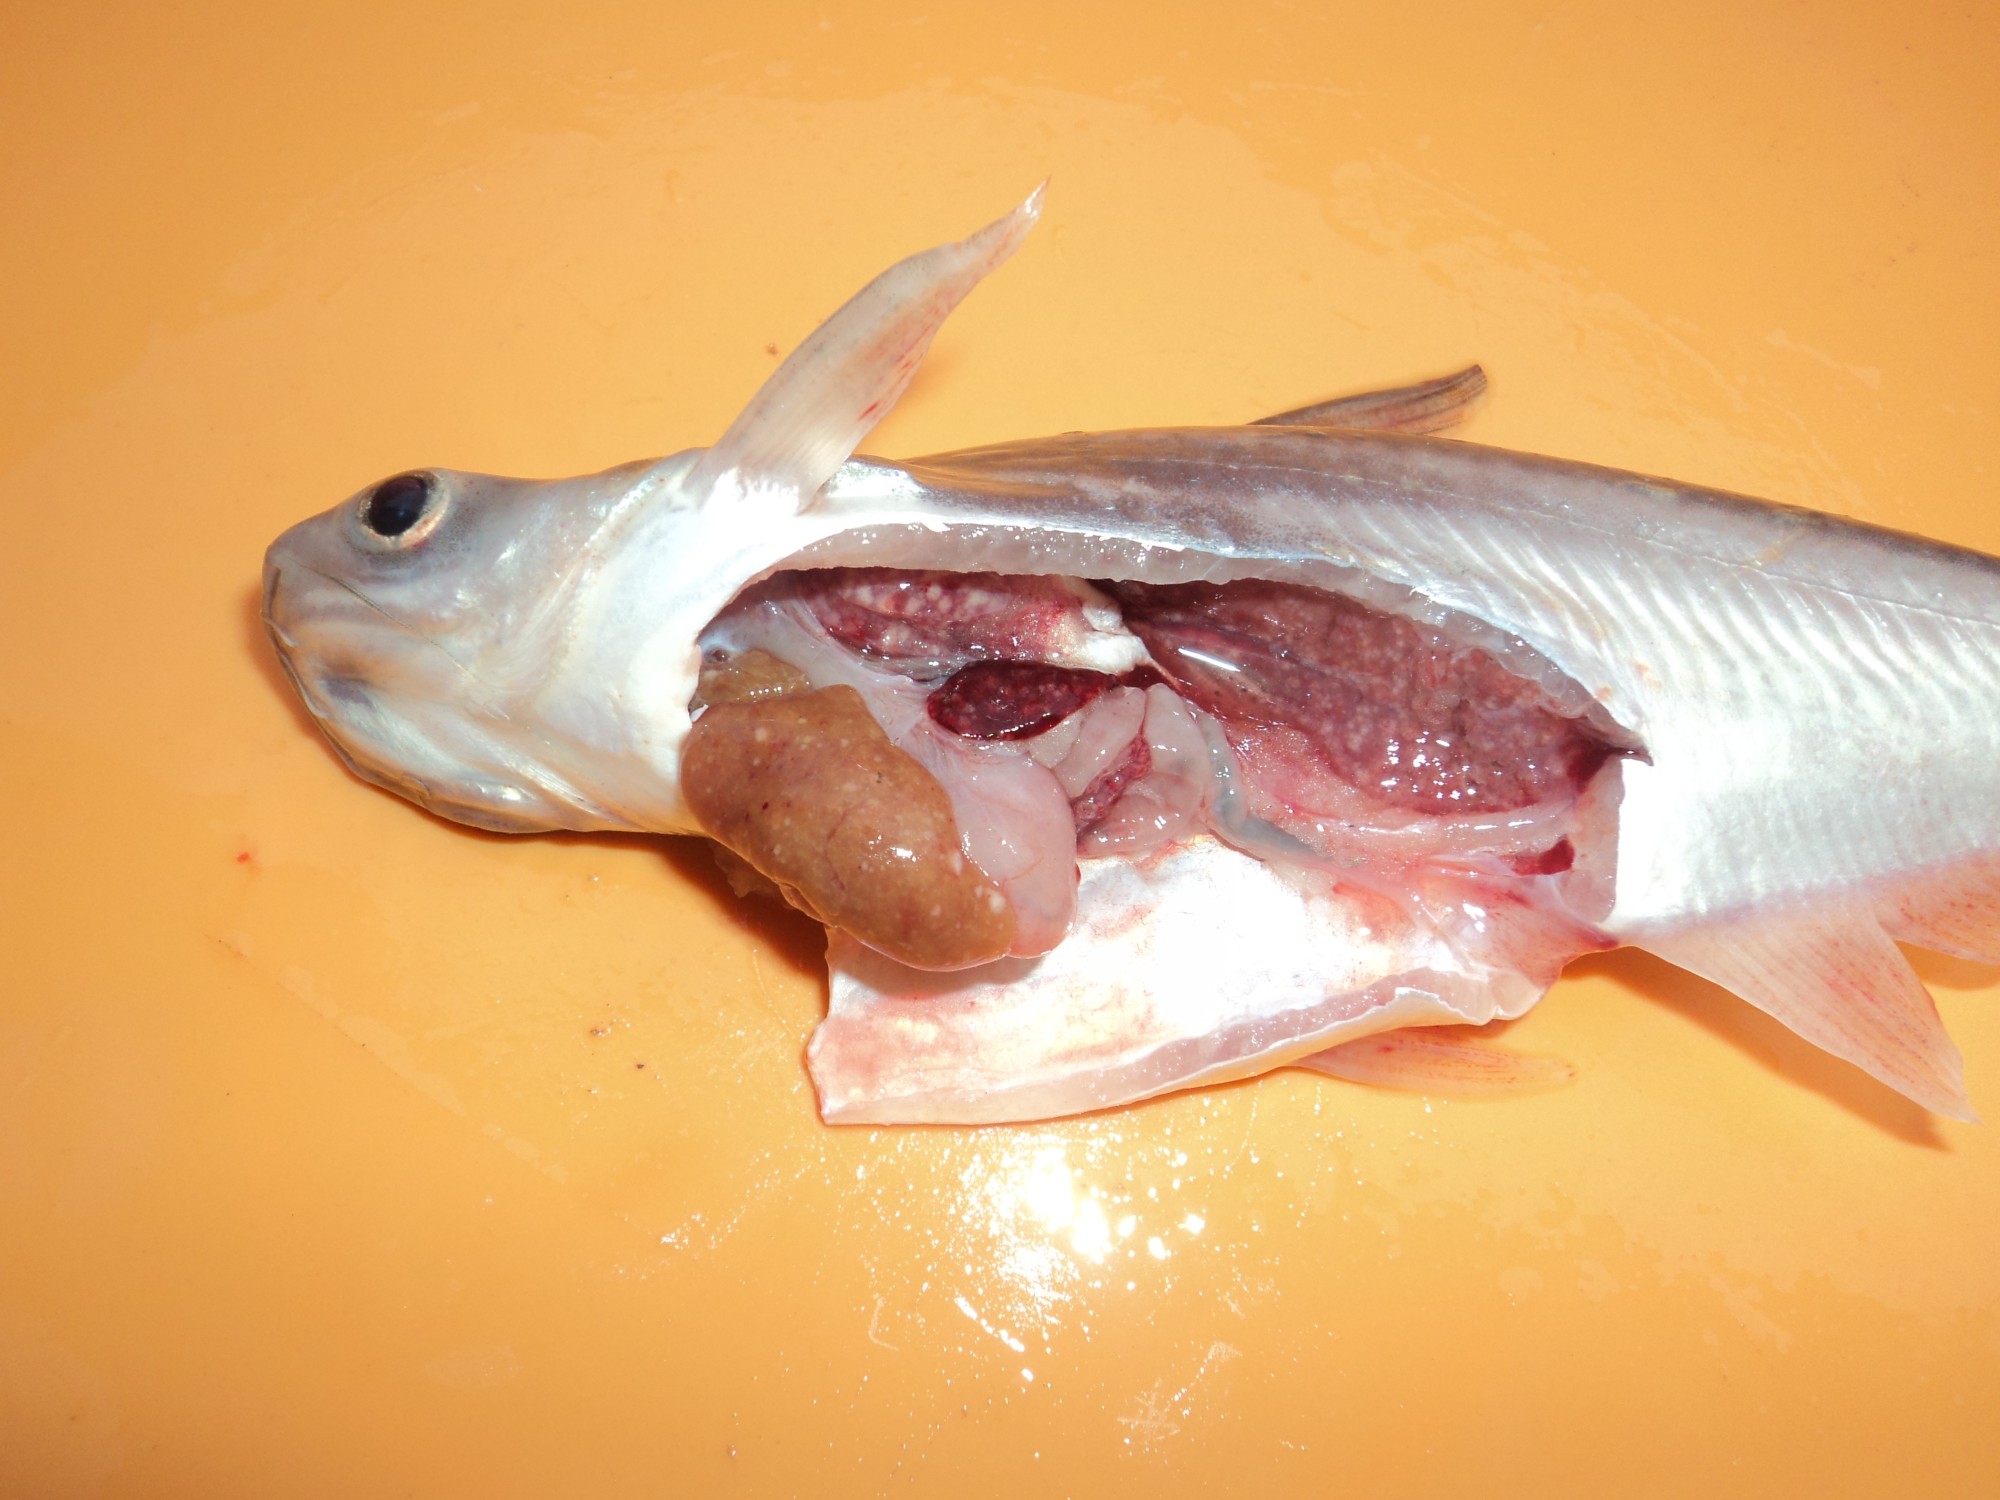 Procedures for the prevention and treatment of white spots in the internal organs disease of fingerling catfish (Pangasianodon hypophthalmus)